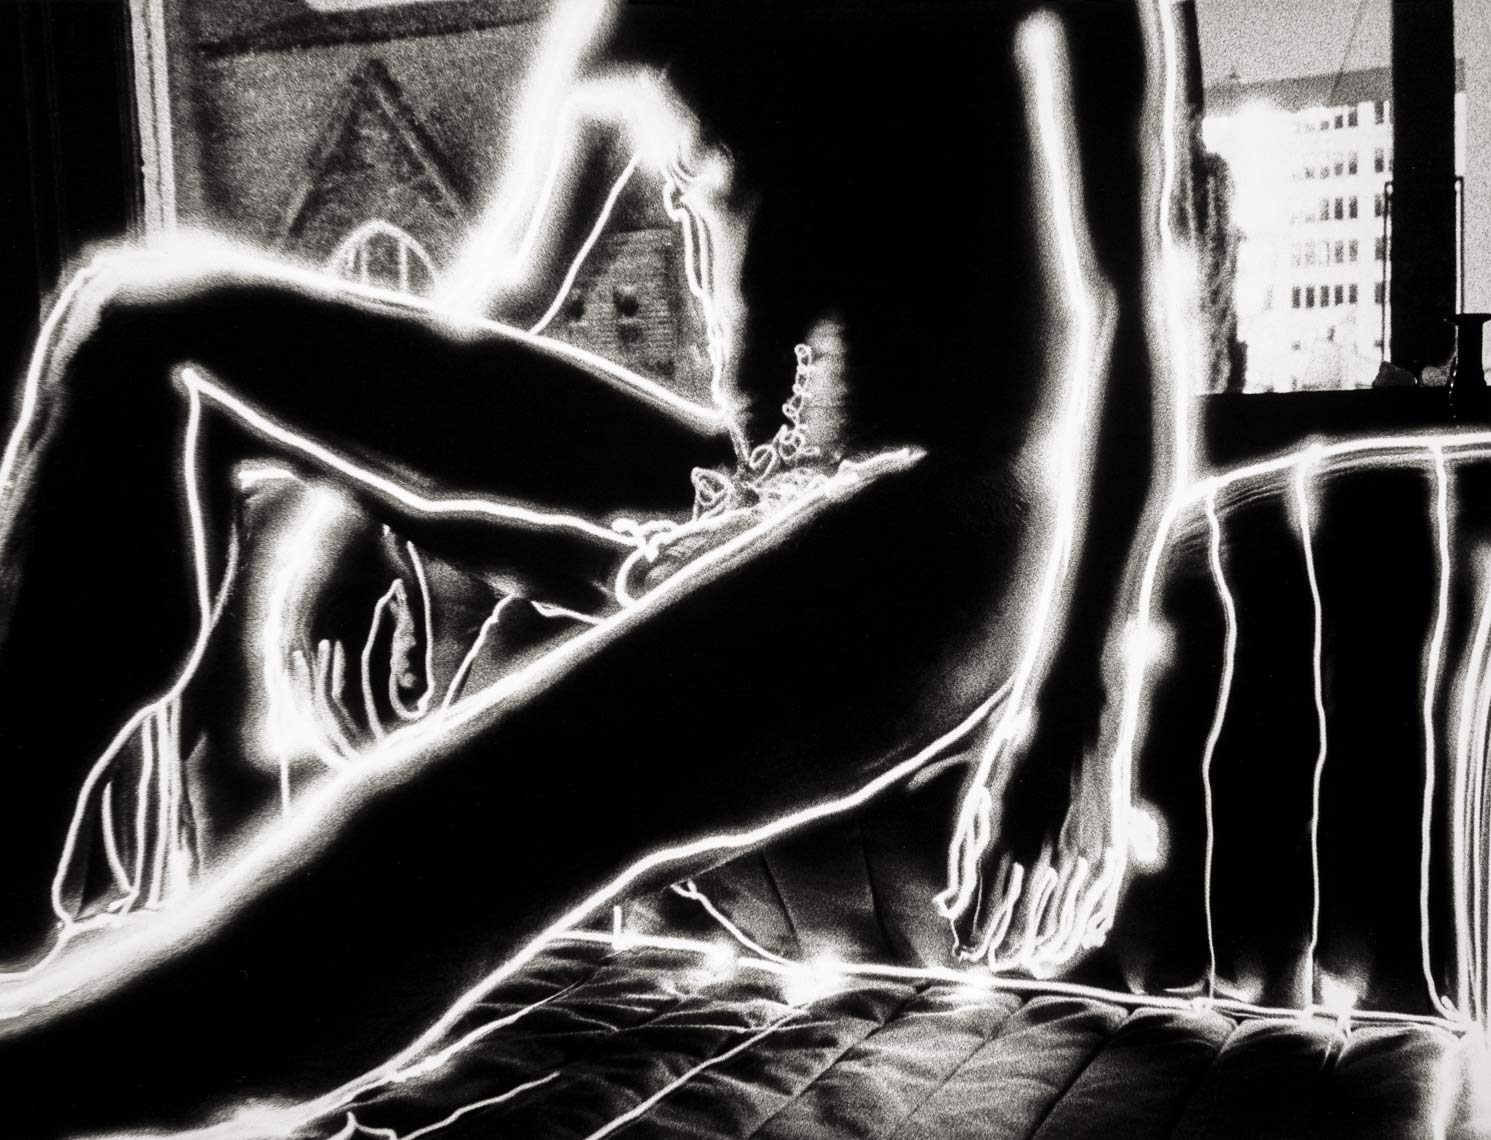 David Lebe; Paul After 1981, male nude, light drawing, black and white photograph